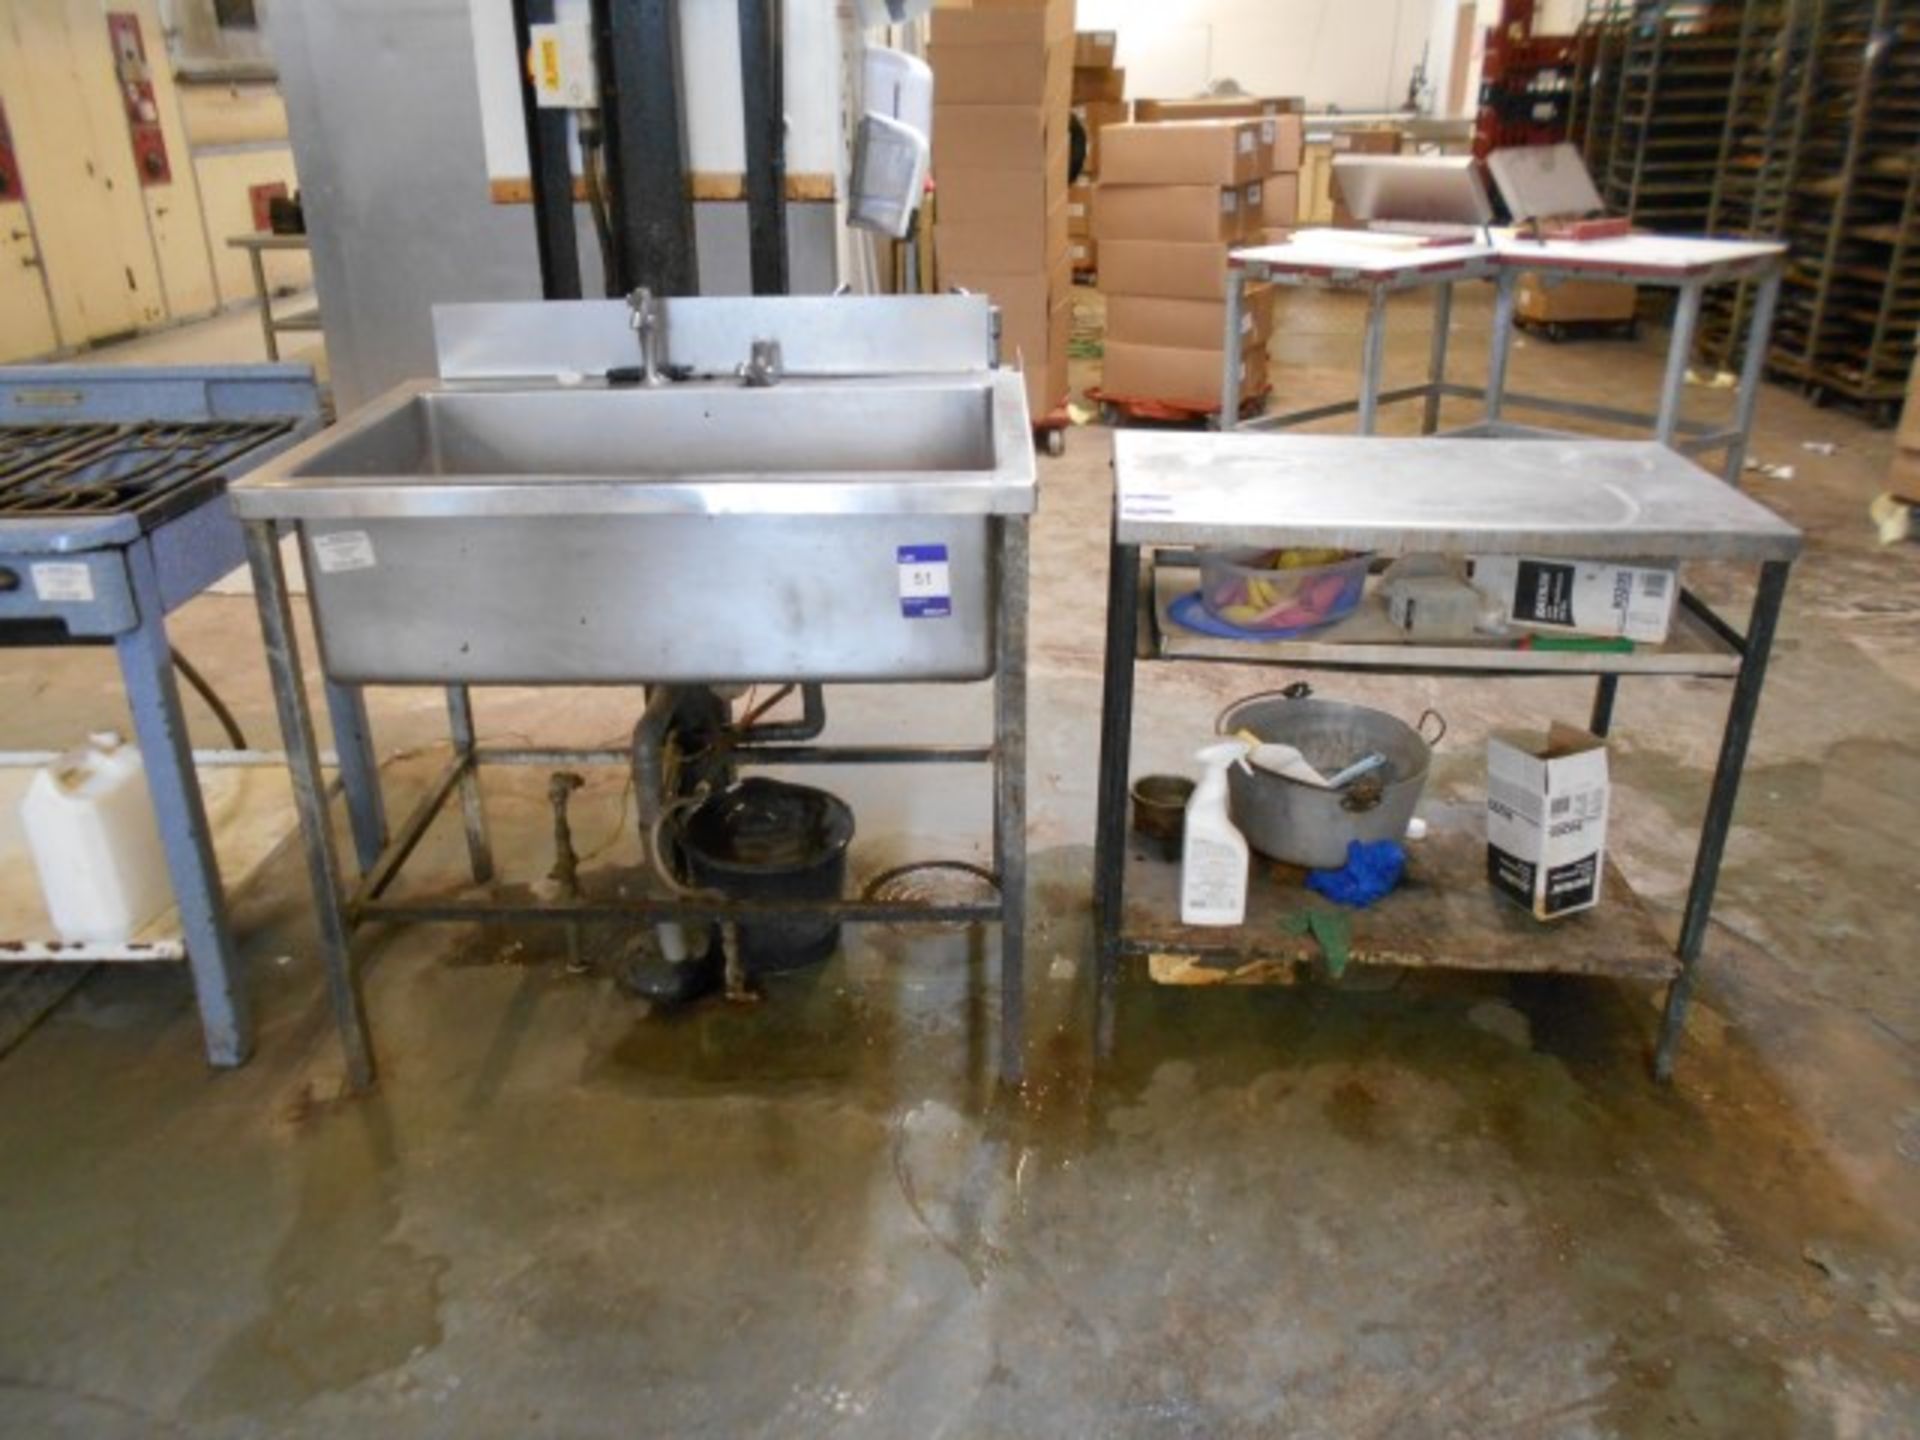 Large Stainless Steel Sink And Preparation Table